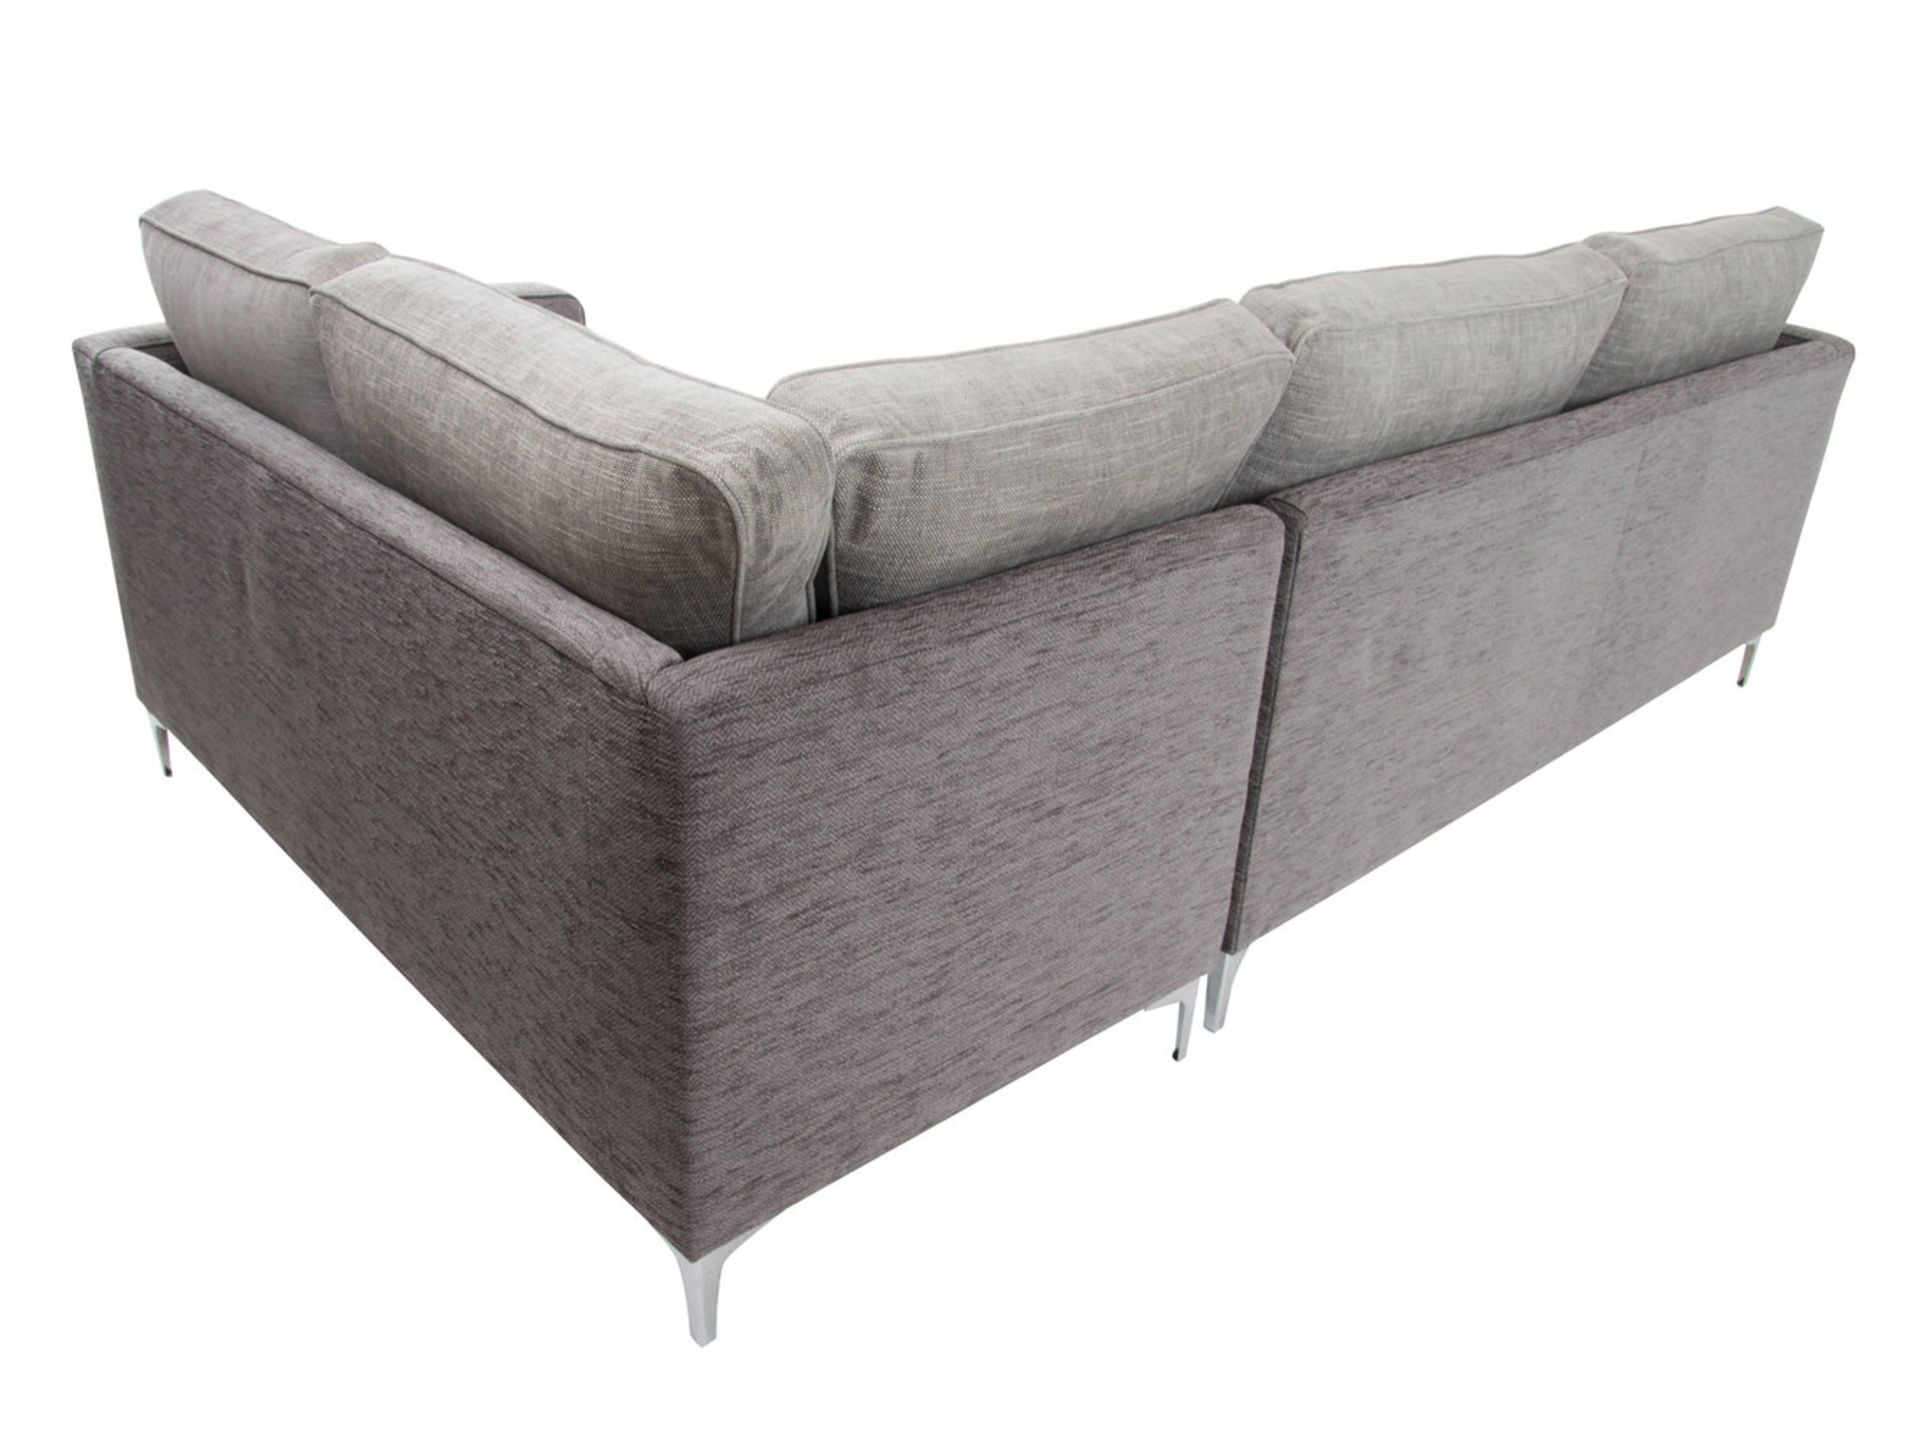 1 x Heyworth Right Hand Corner Sofa With Pewter & Cloud Fabric Upholstery - RRP £2,649! - Image 2 of 6